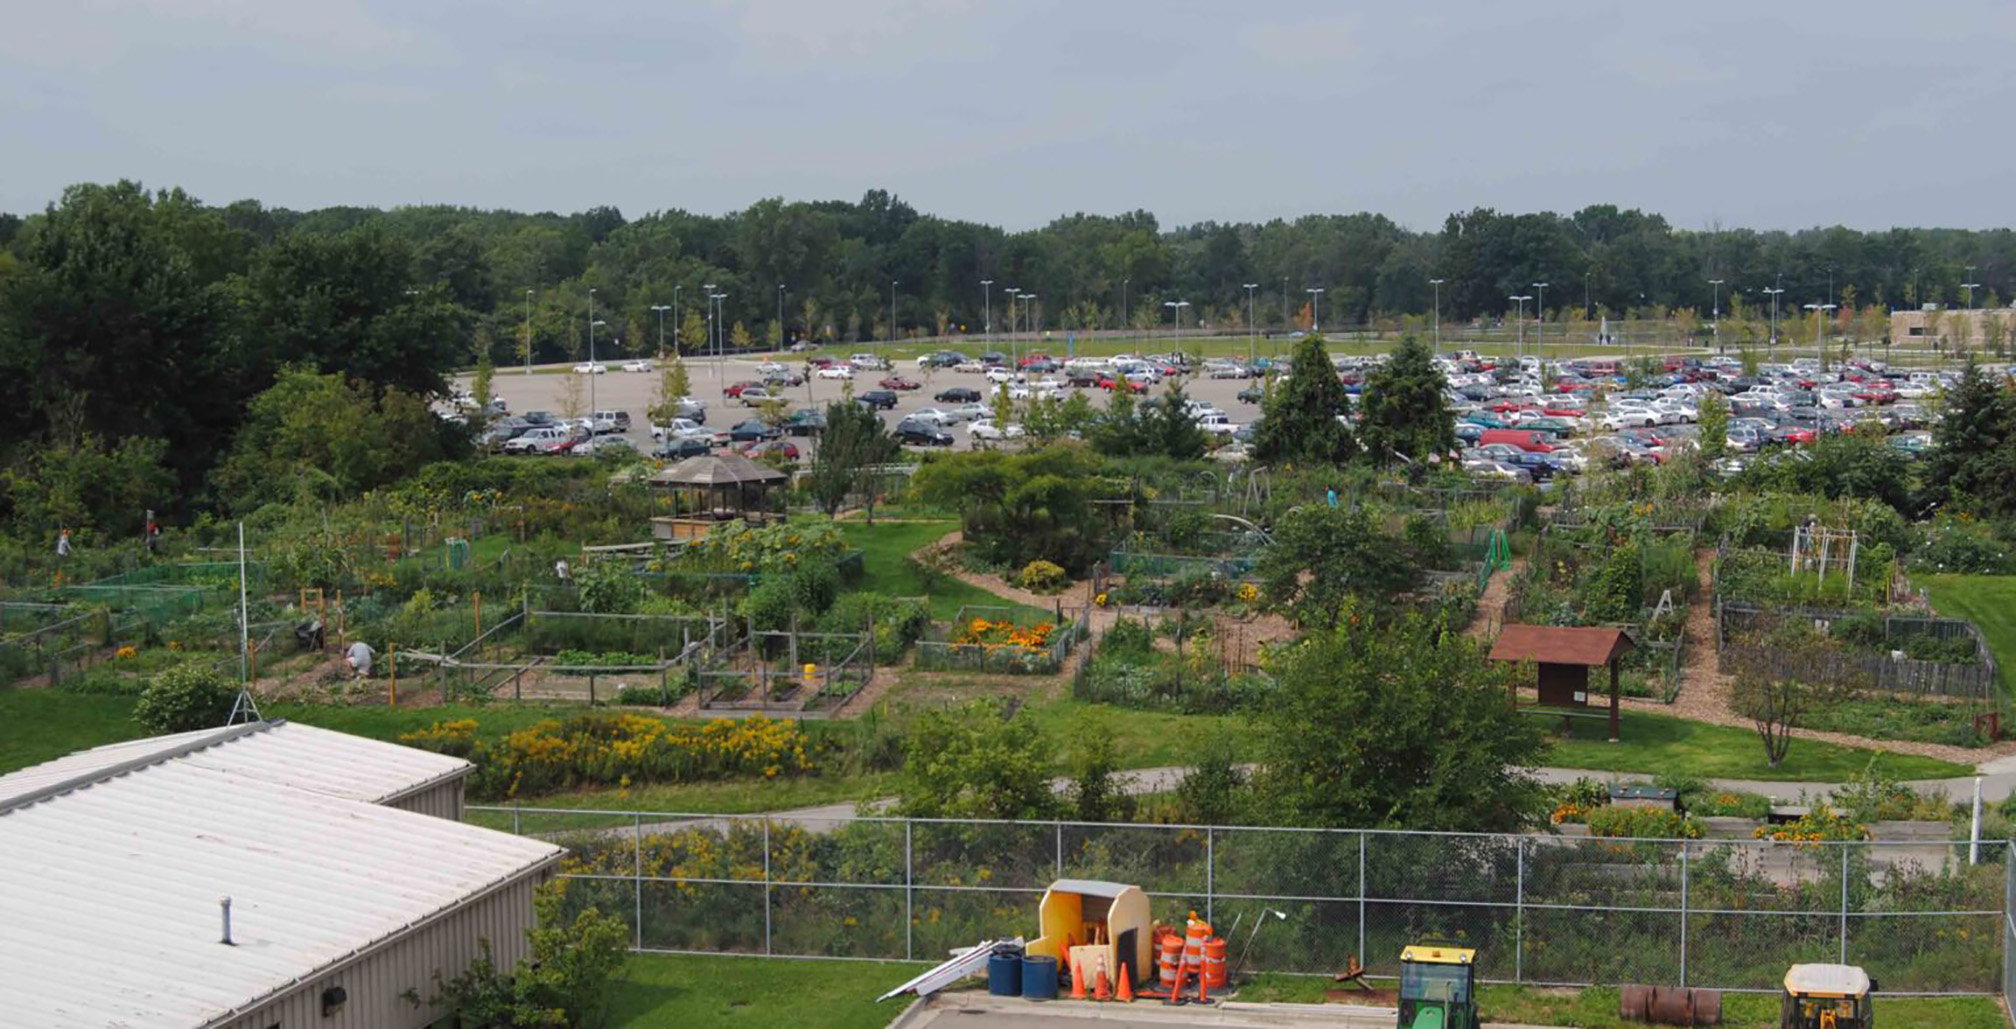 A view looking across the community garden. The garden is made up of many small plots in rows. Some plots have orange or yellow flowers, some bushy green plants, others fruit trees. Brown paths weave between the plots, connecting them with the parking lot beyond.